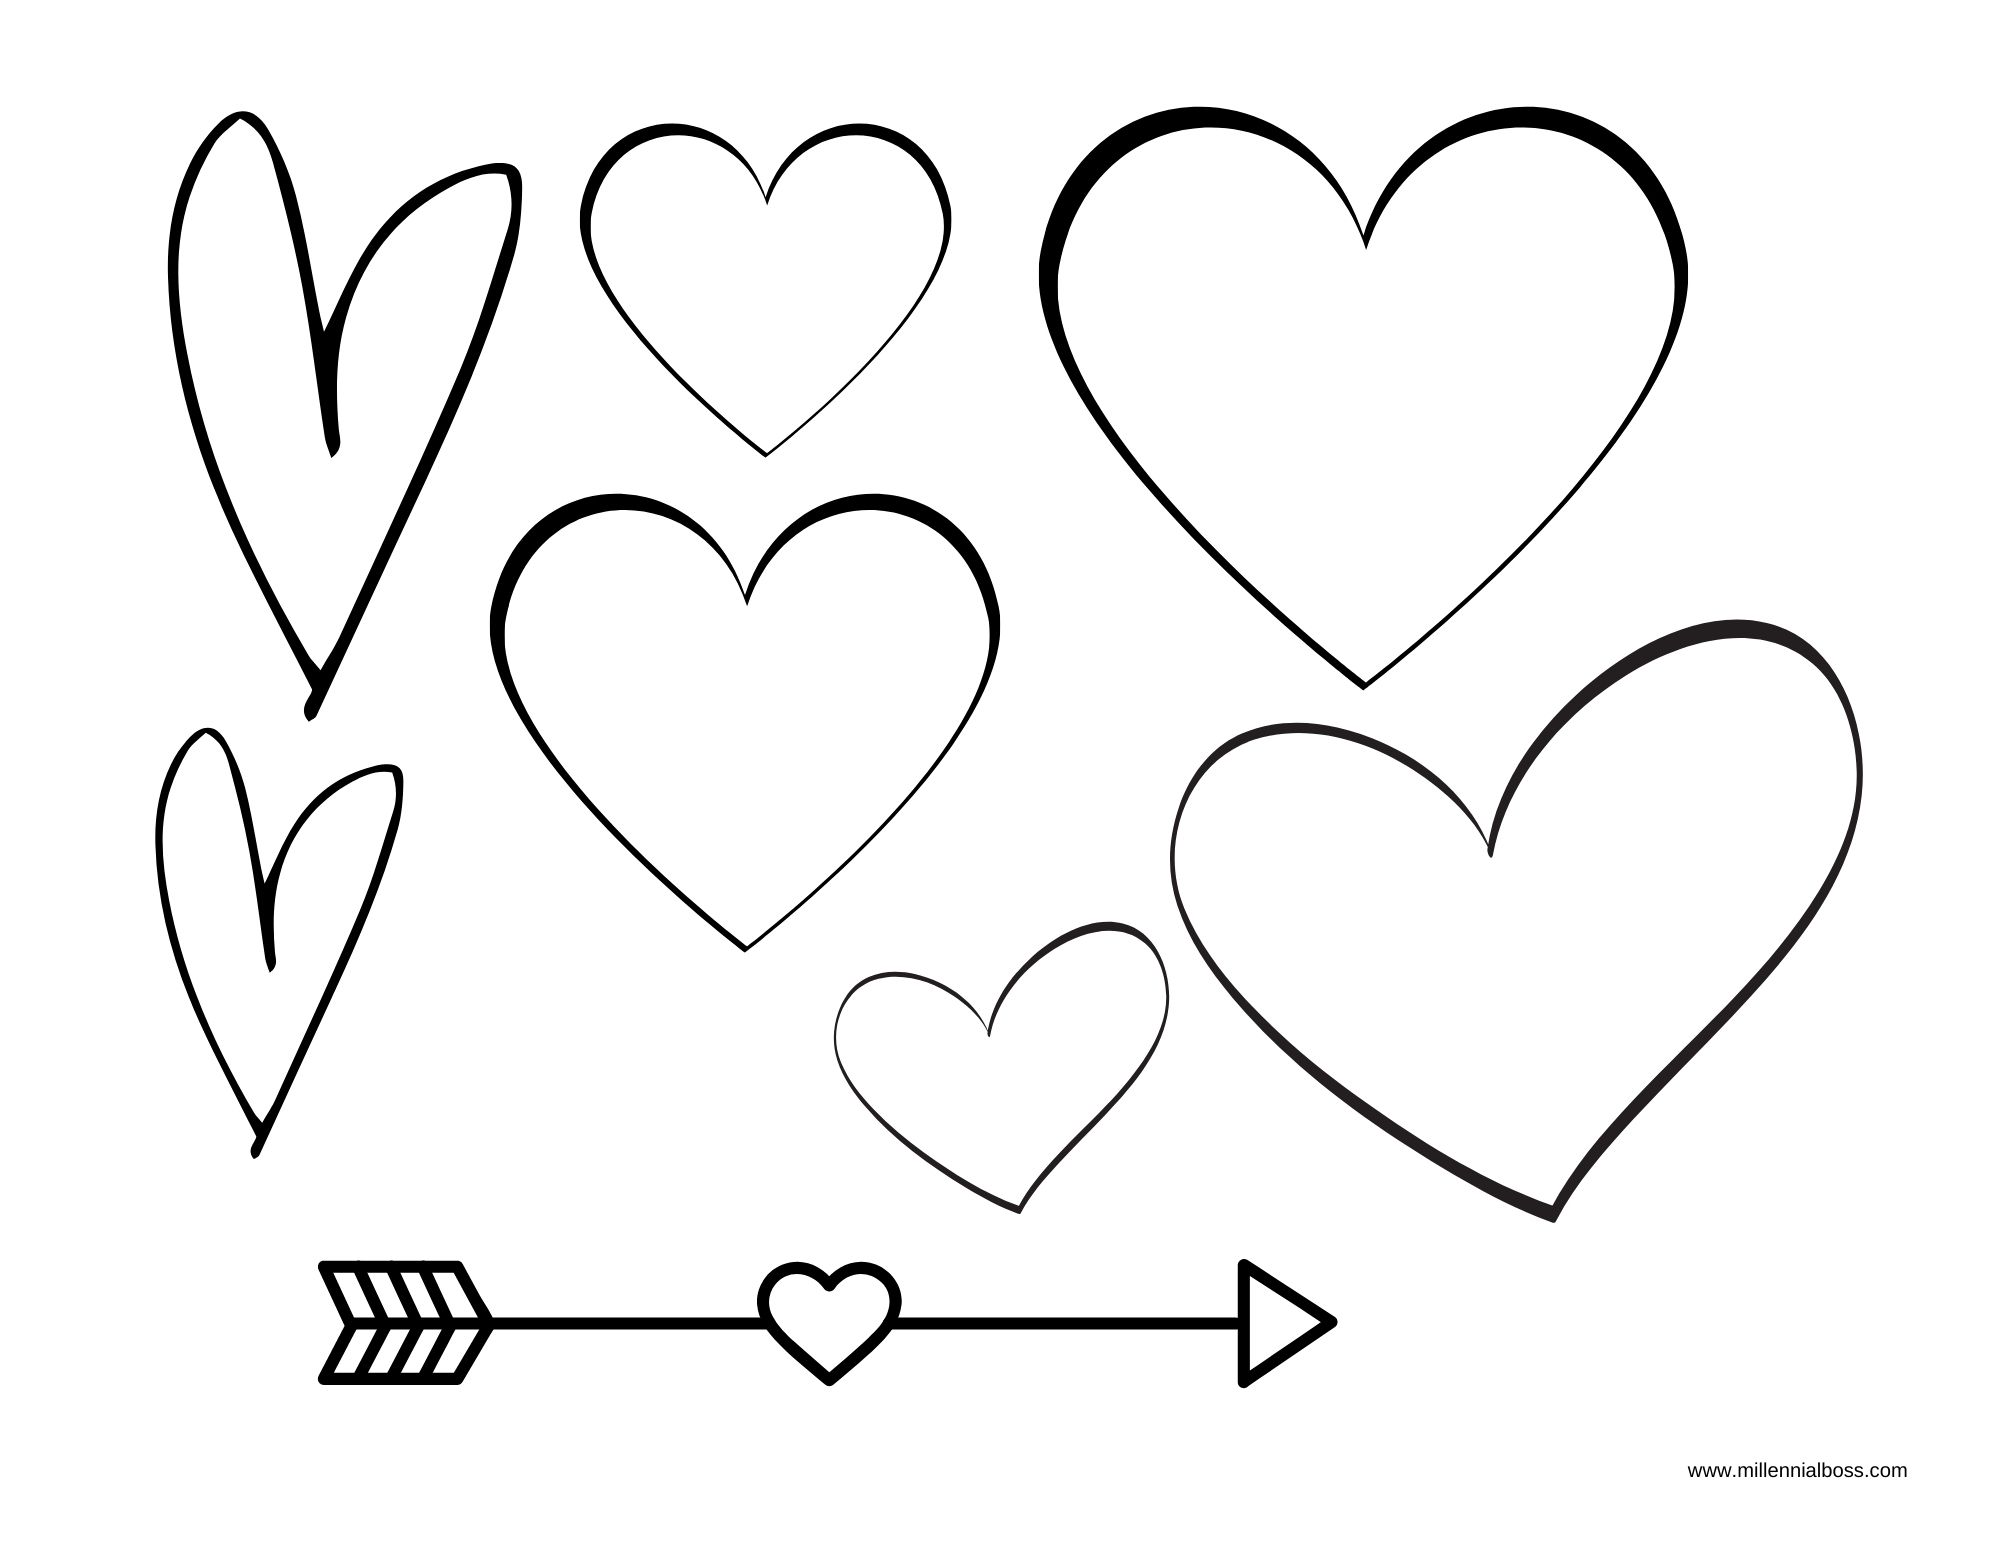 7-best-images-of-4-printable-heart-template-valentine-heart-template